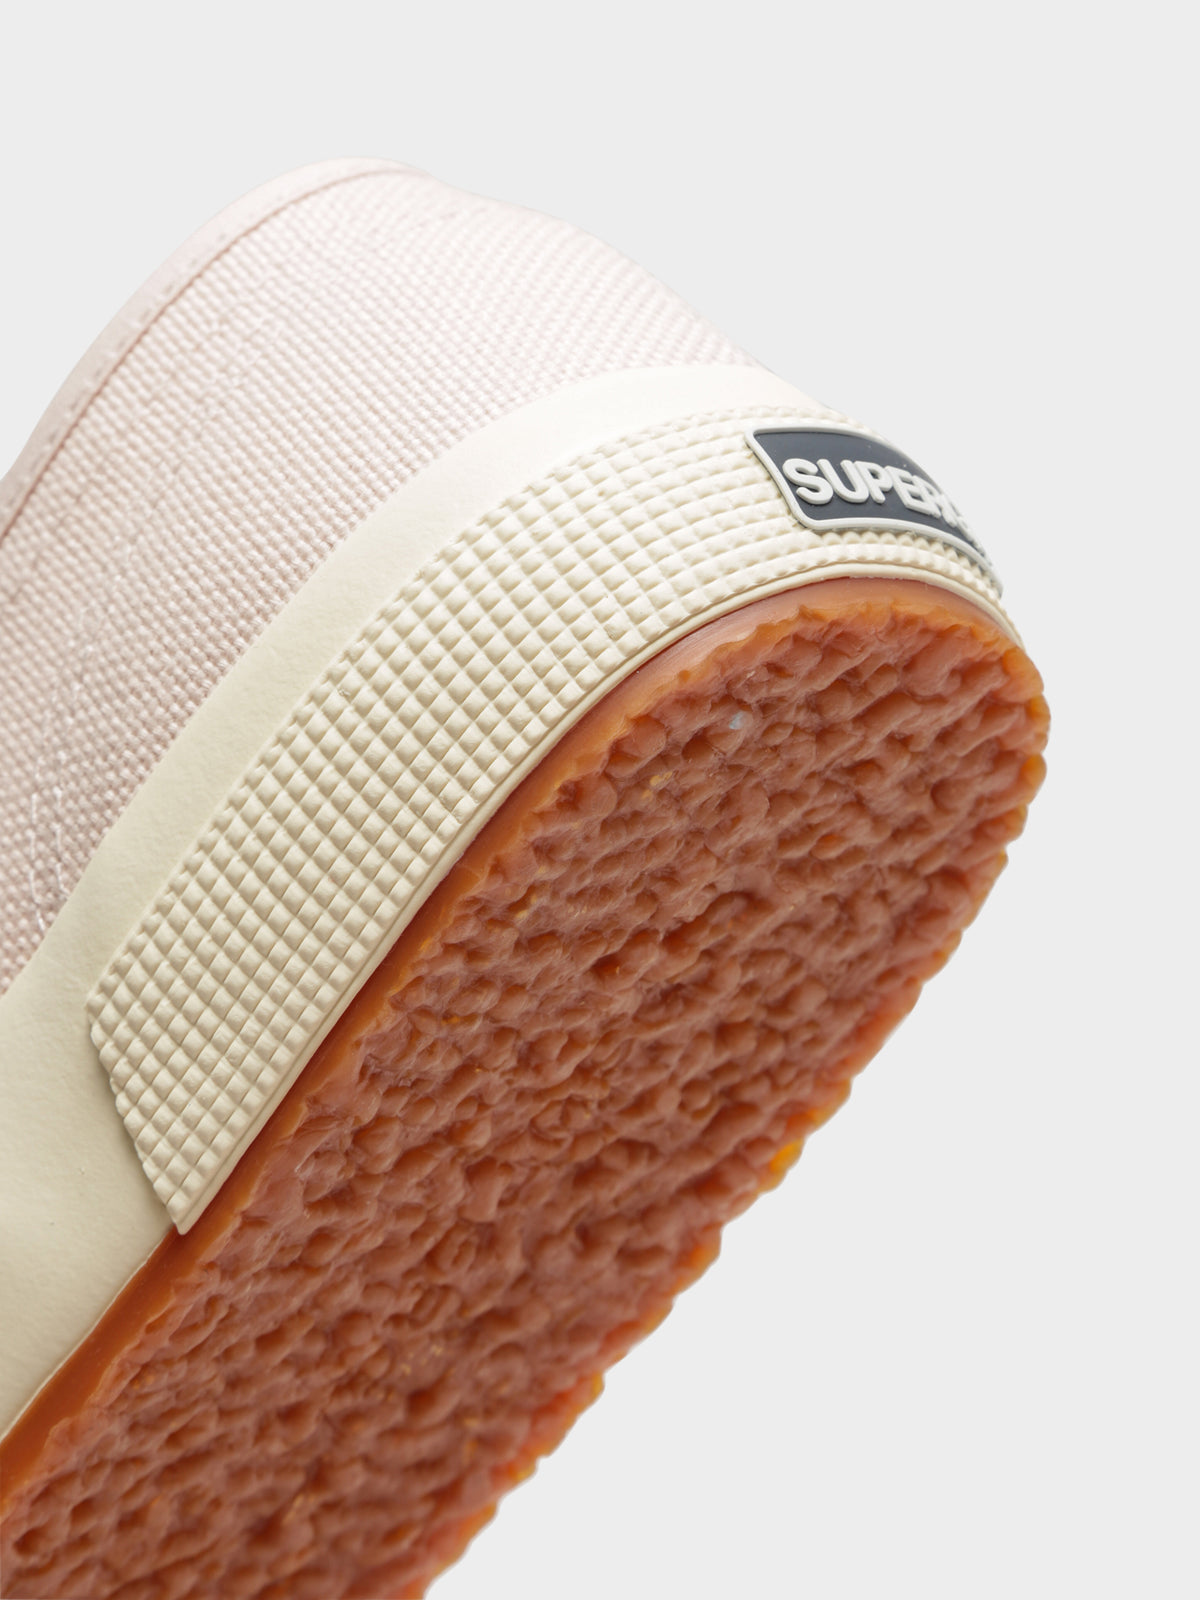 2750 Cotu Classic Sneakers in Pink Peach &amp; Off White